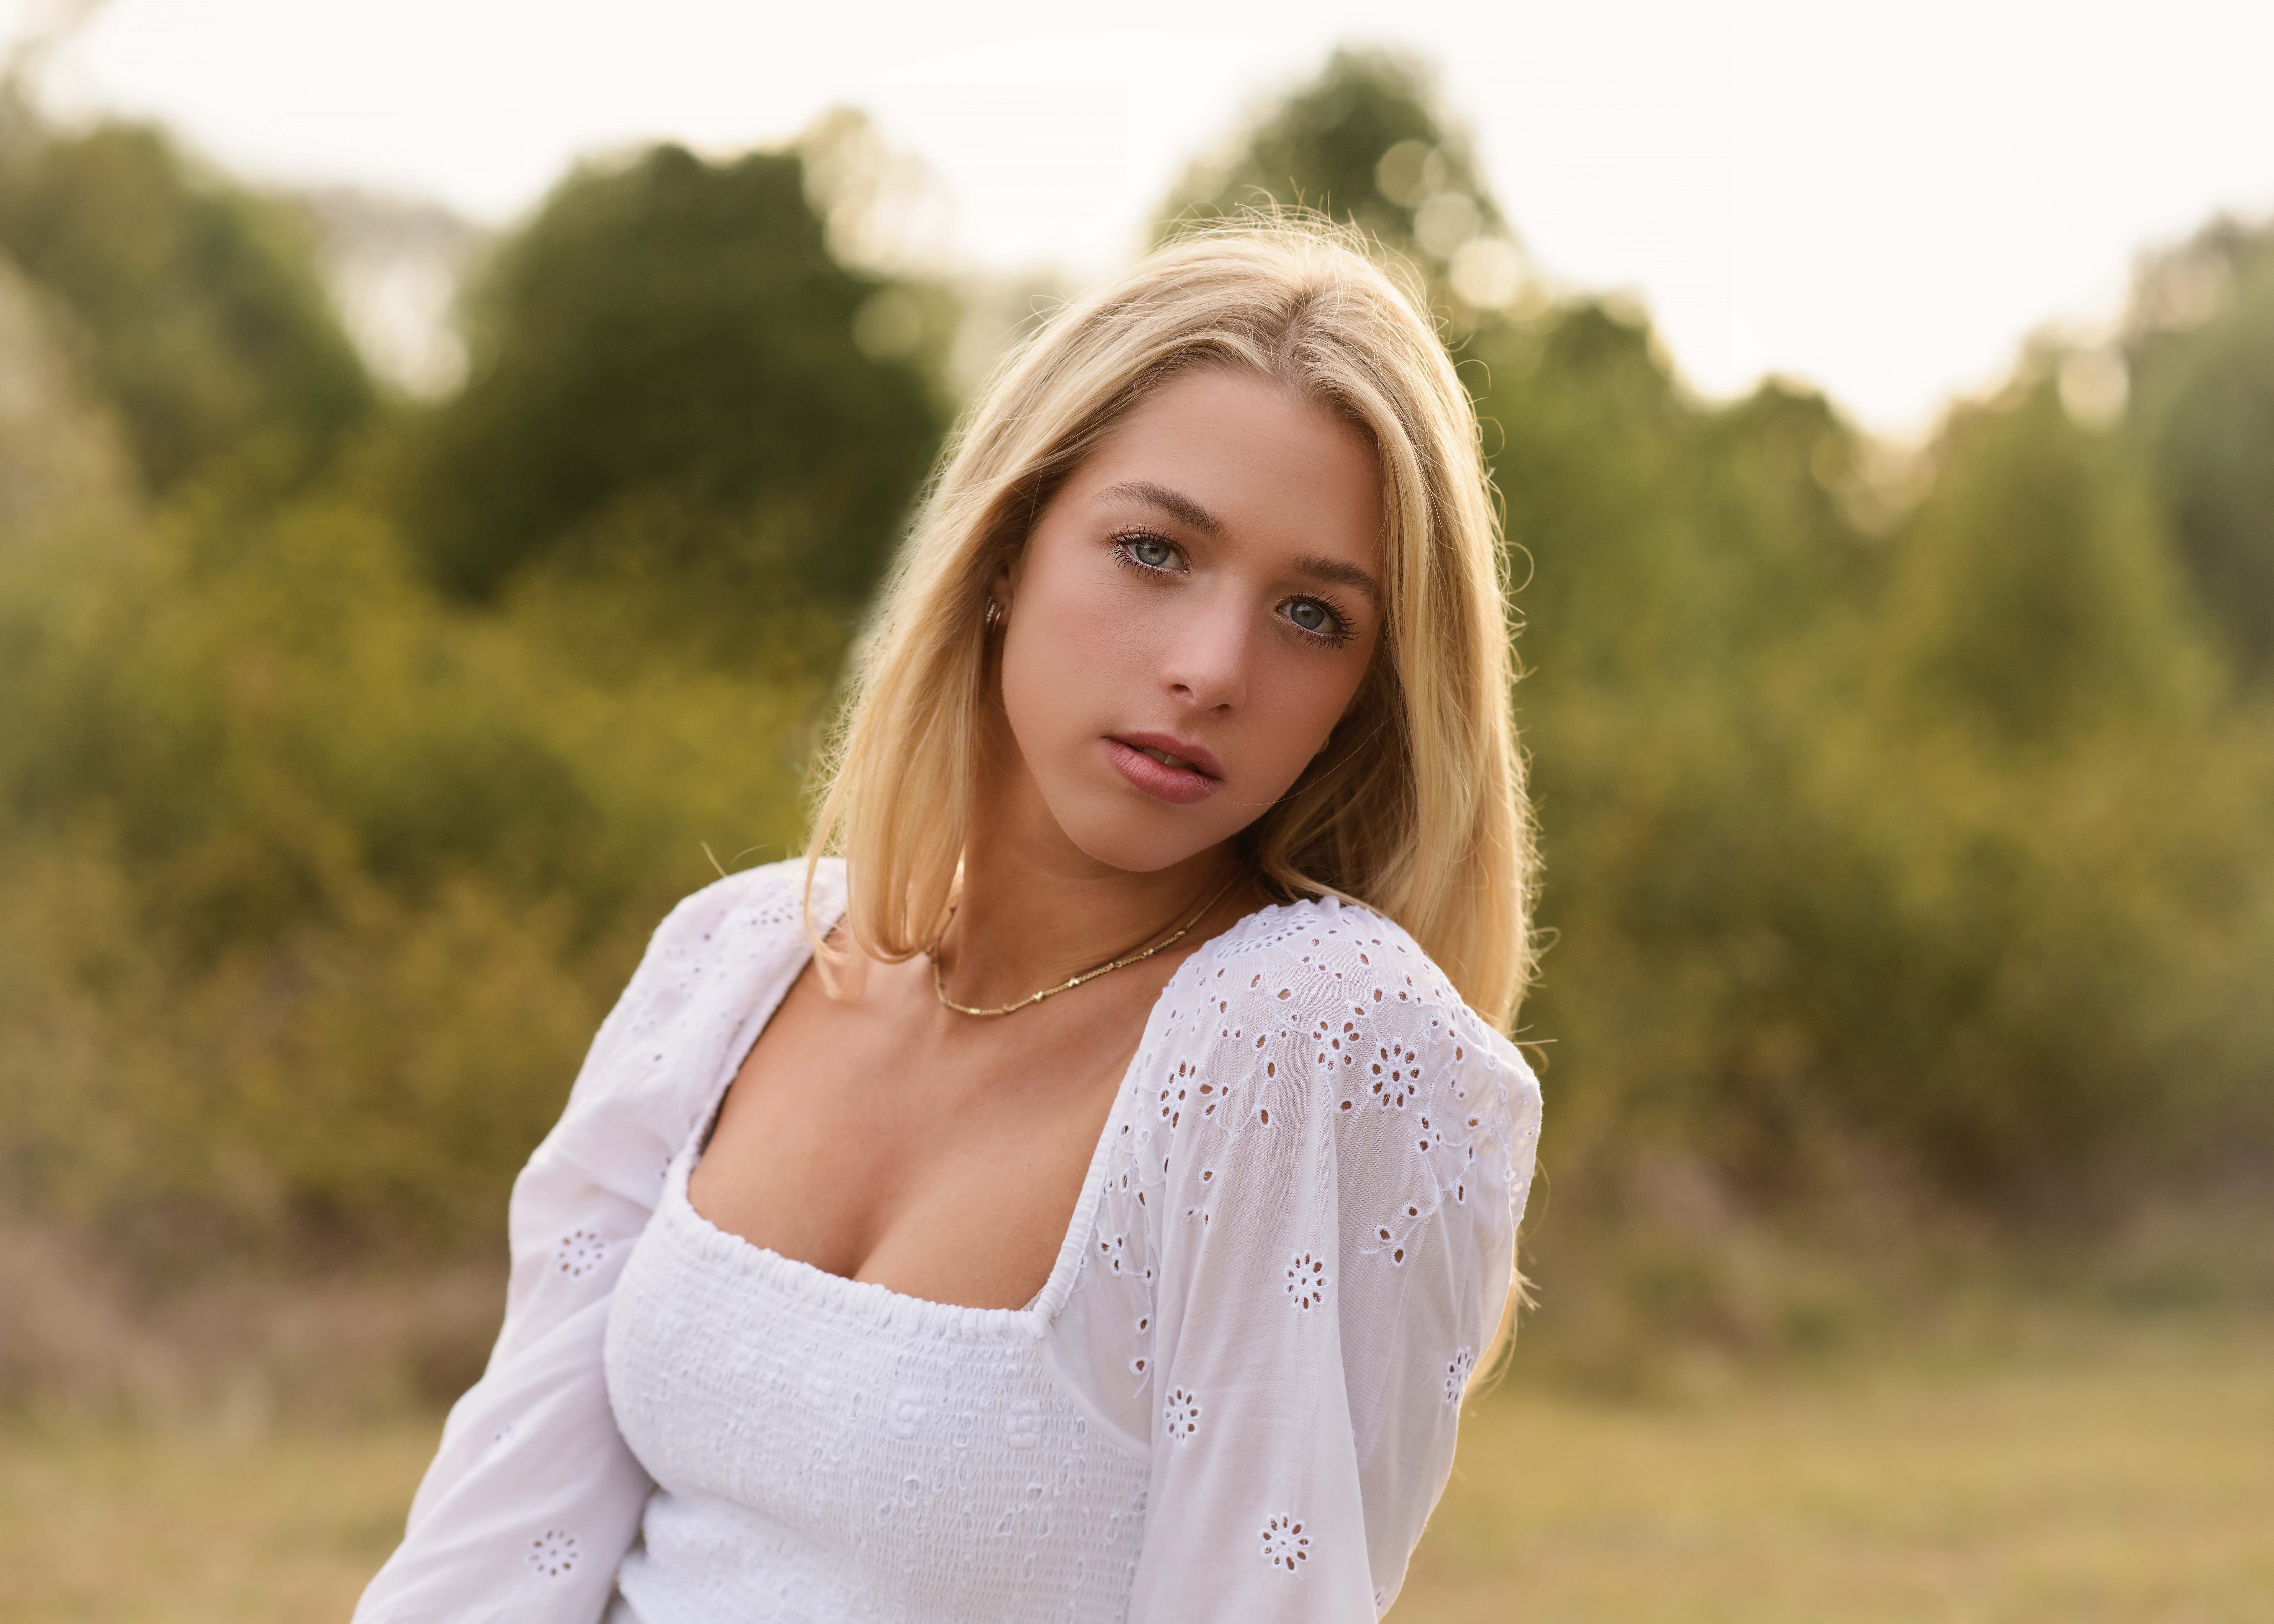 Young blonde girl outdoors in front of green trees in white peasant type top slightly looking over her shoulder with a serious face